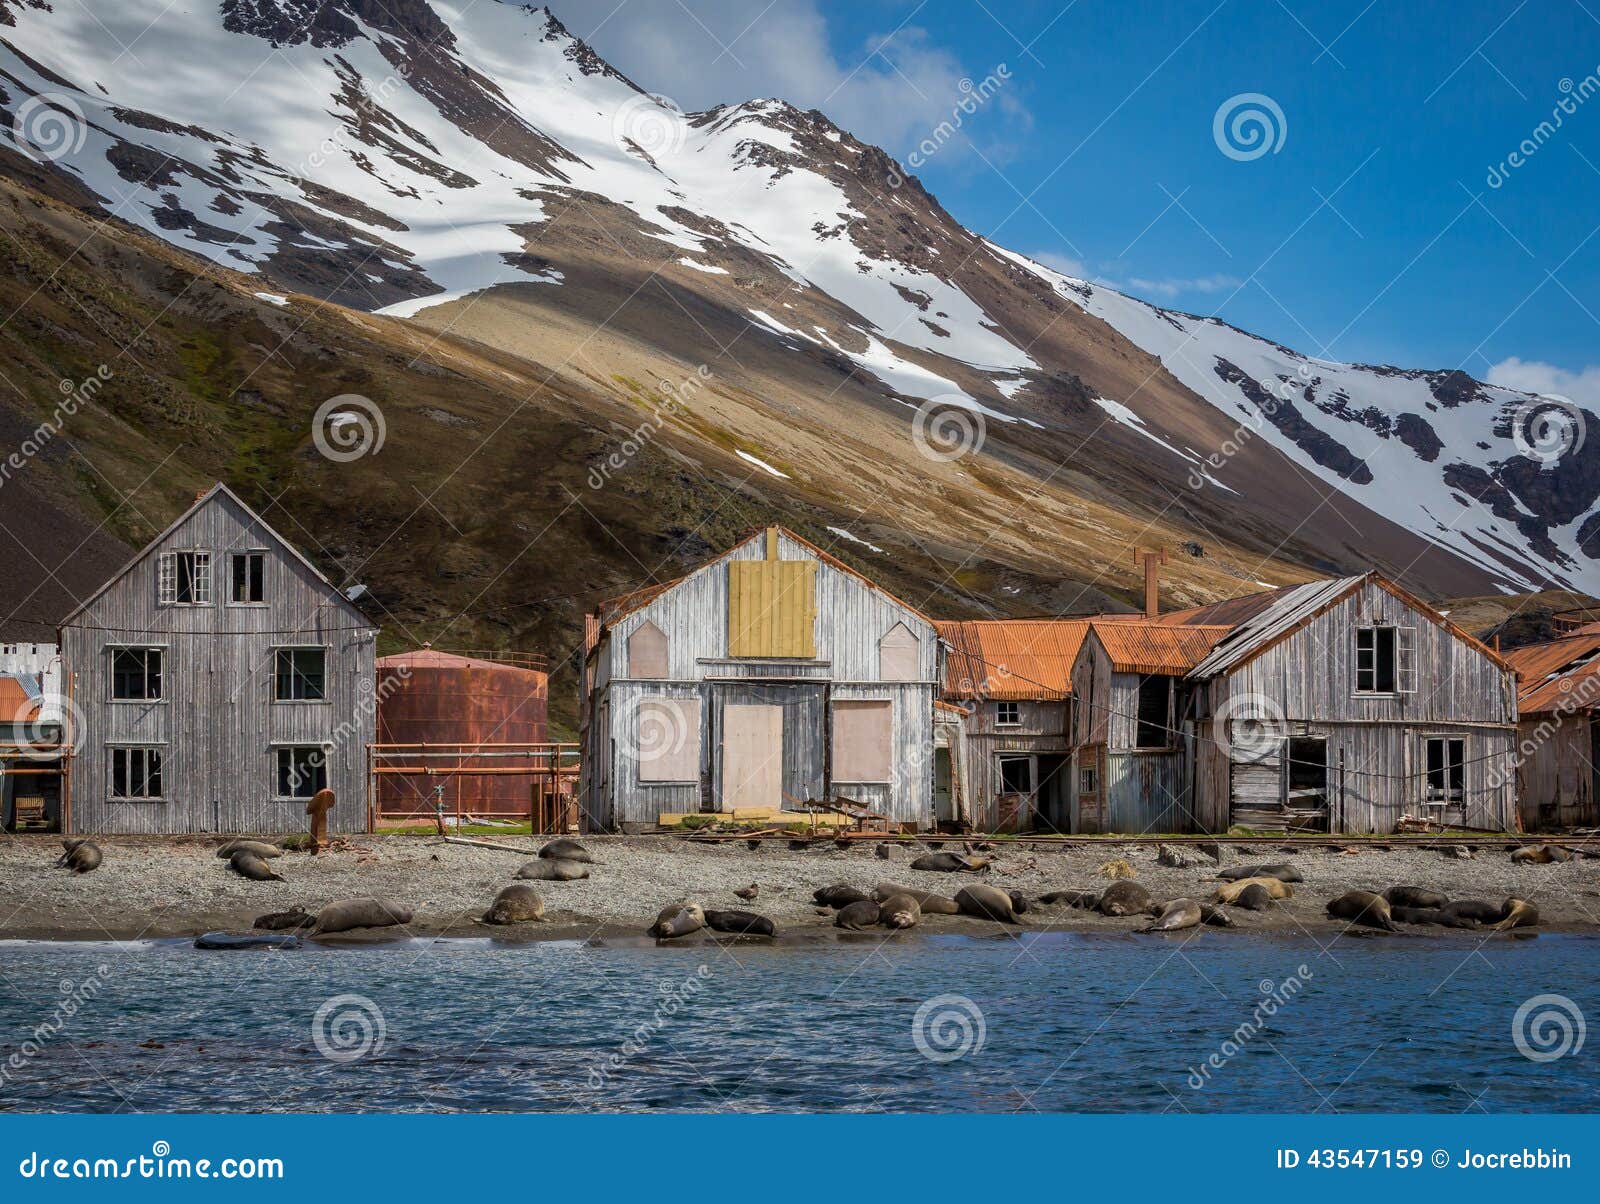 whaling village abandoned after all the whales were killed in 1920's